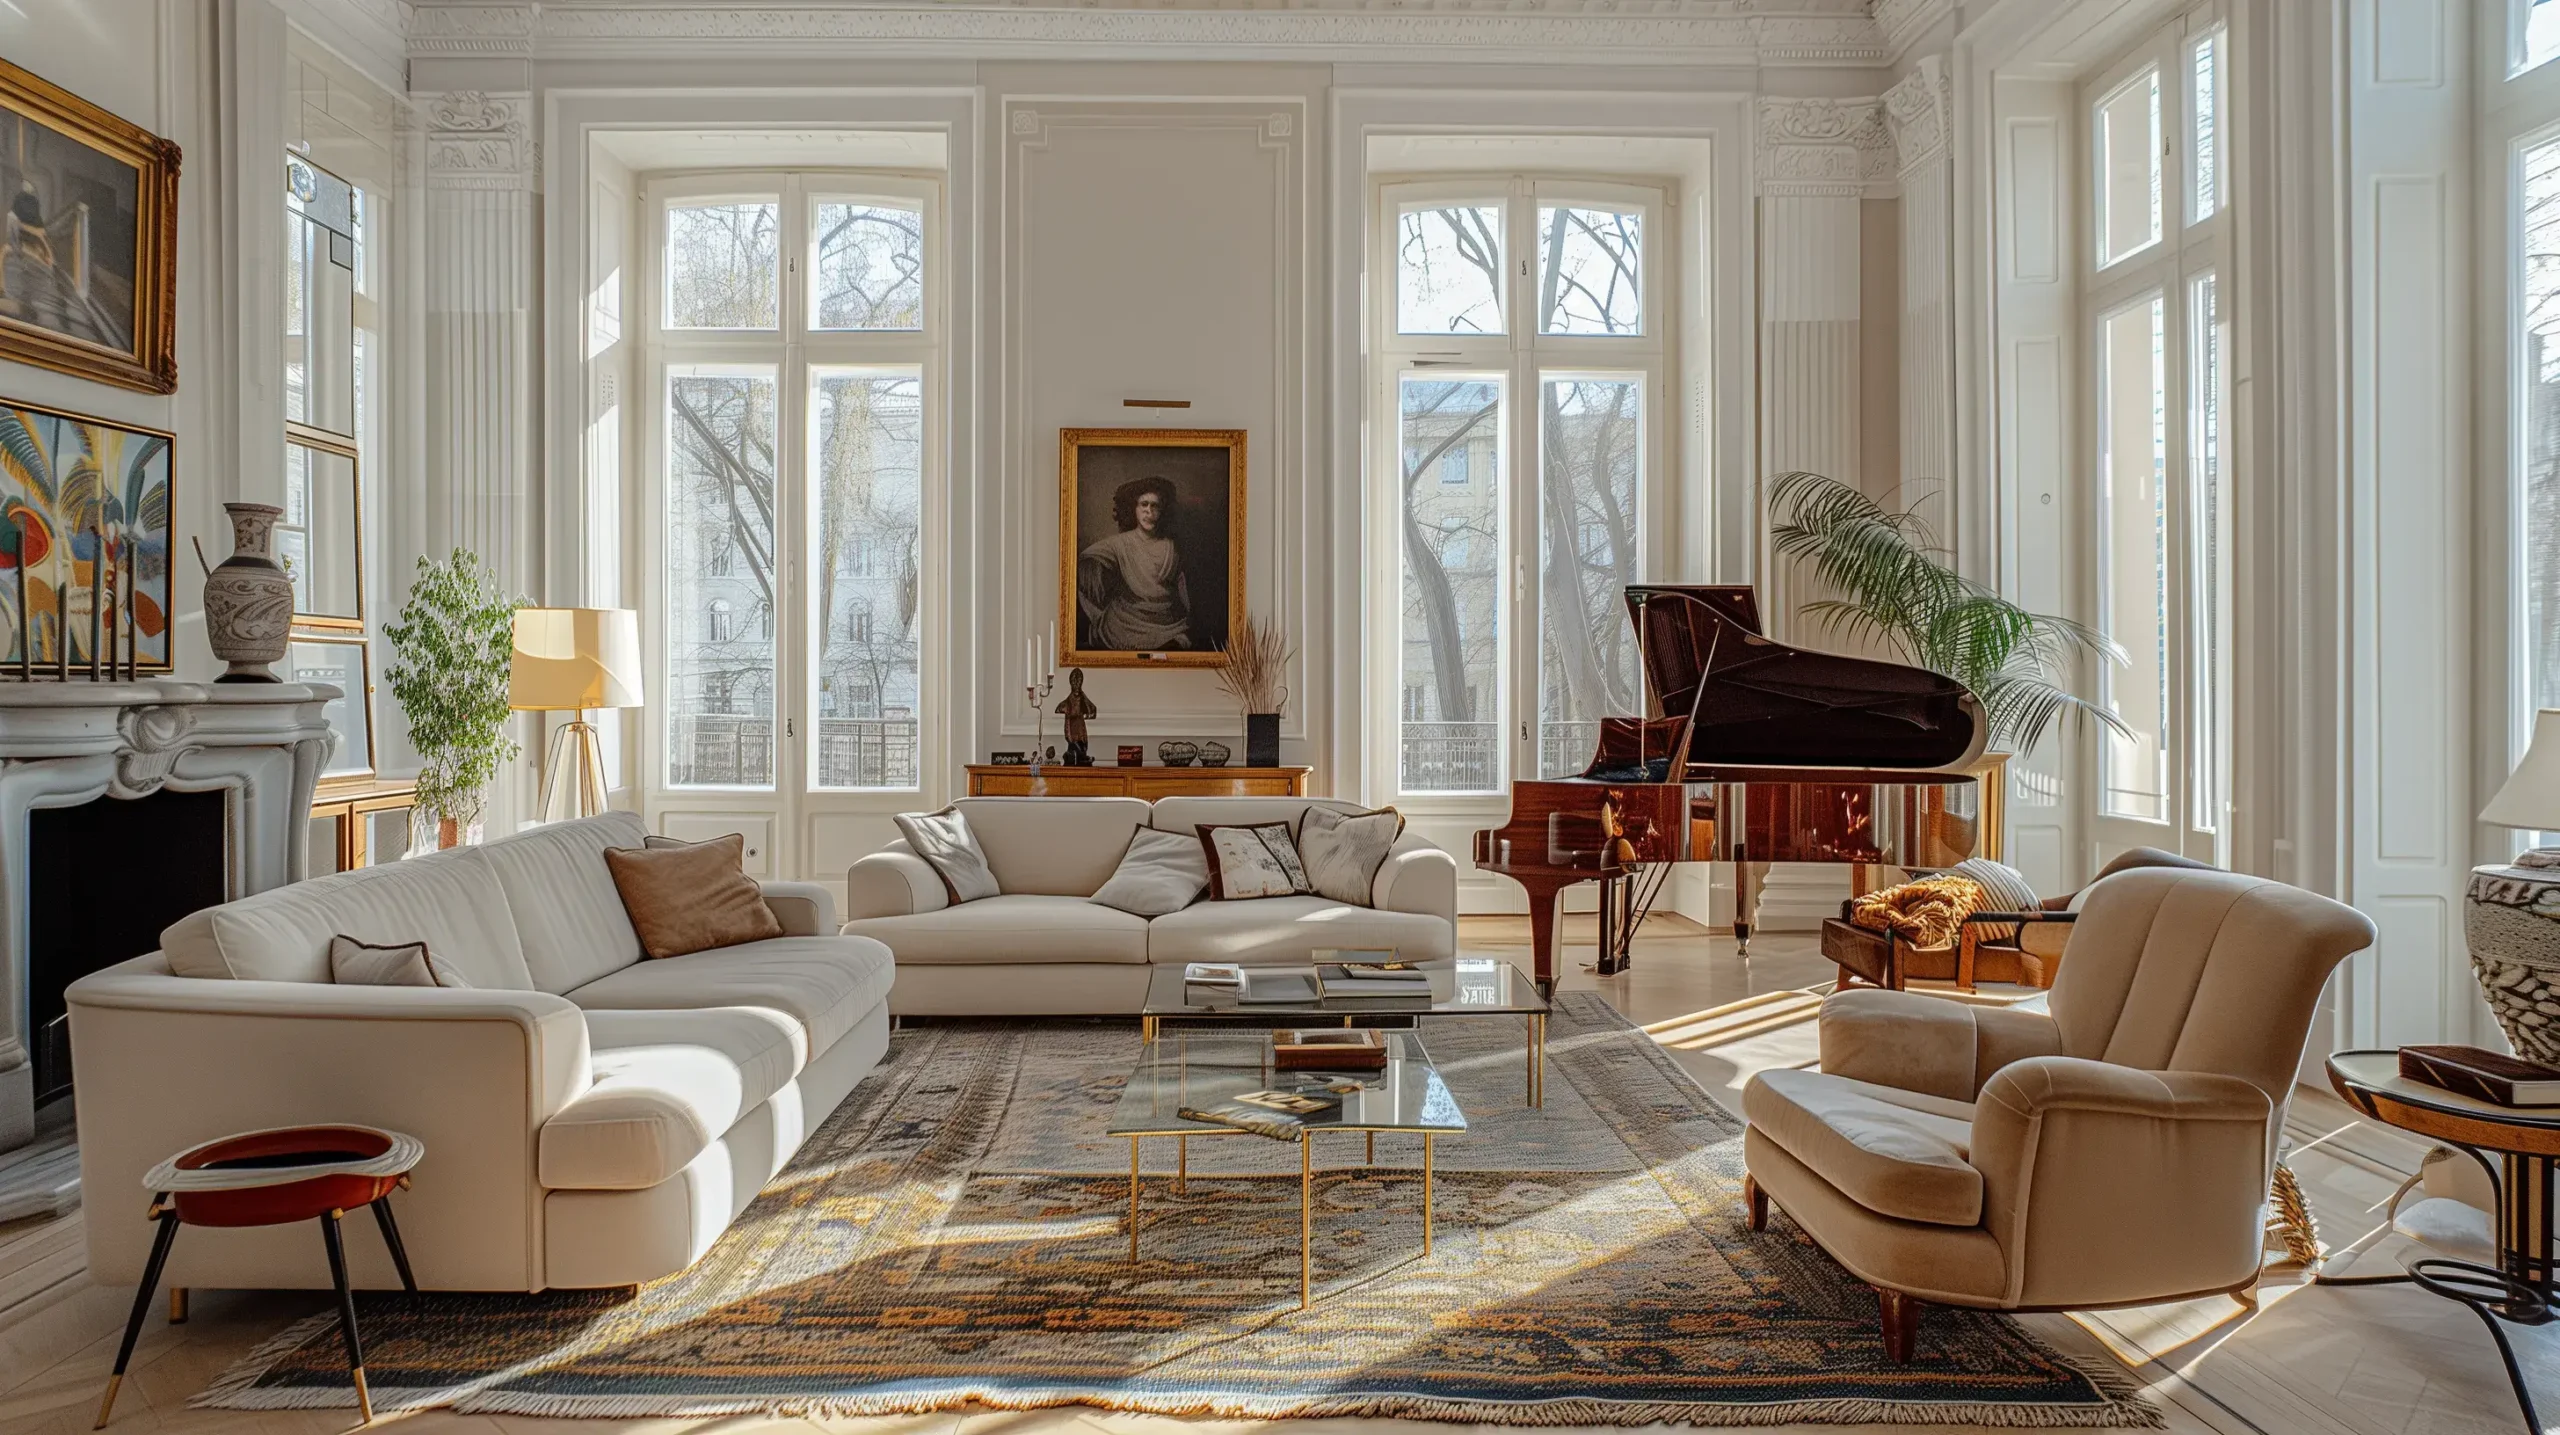 an old style home has a huge living room, in the style of classical compositions, golden light, classical portraits, jazzy interiors, white and gray, 19th century style, mid-century